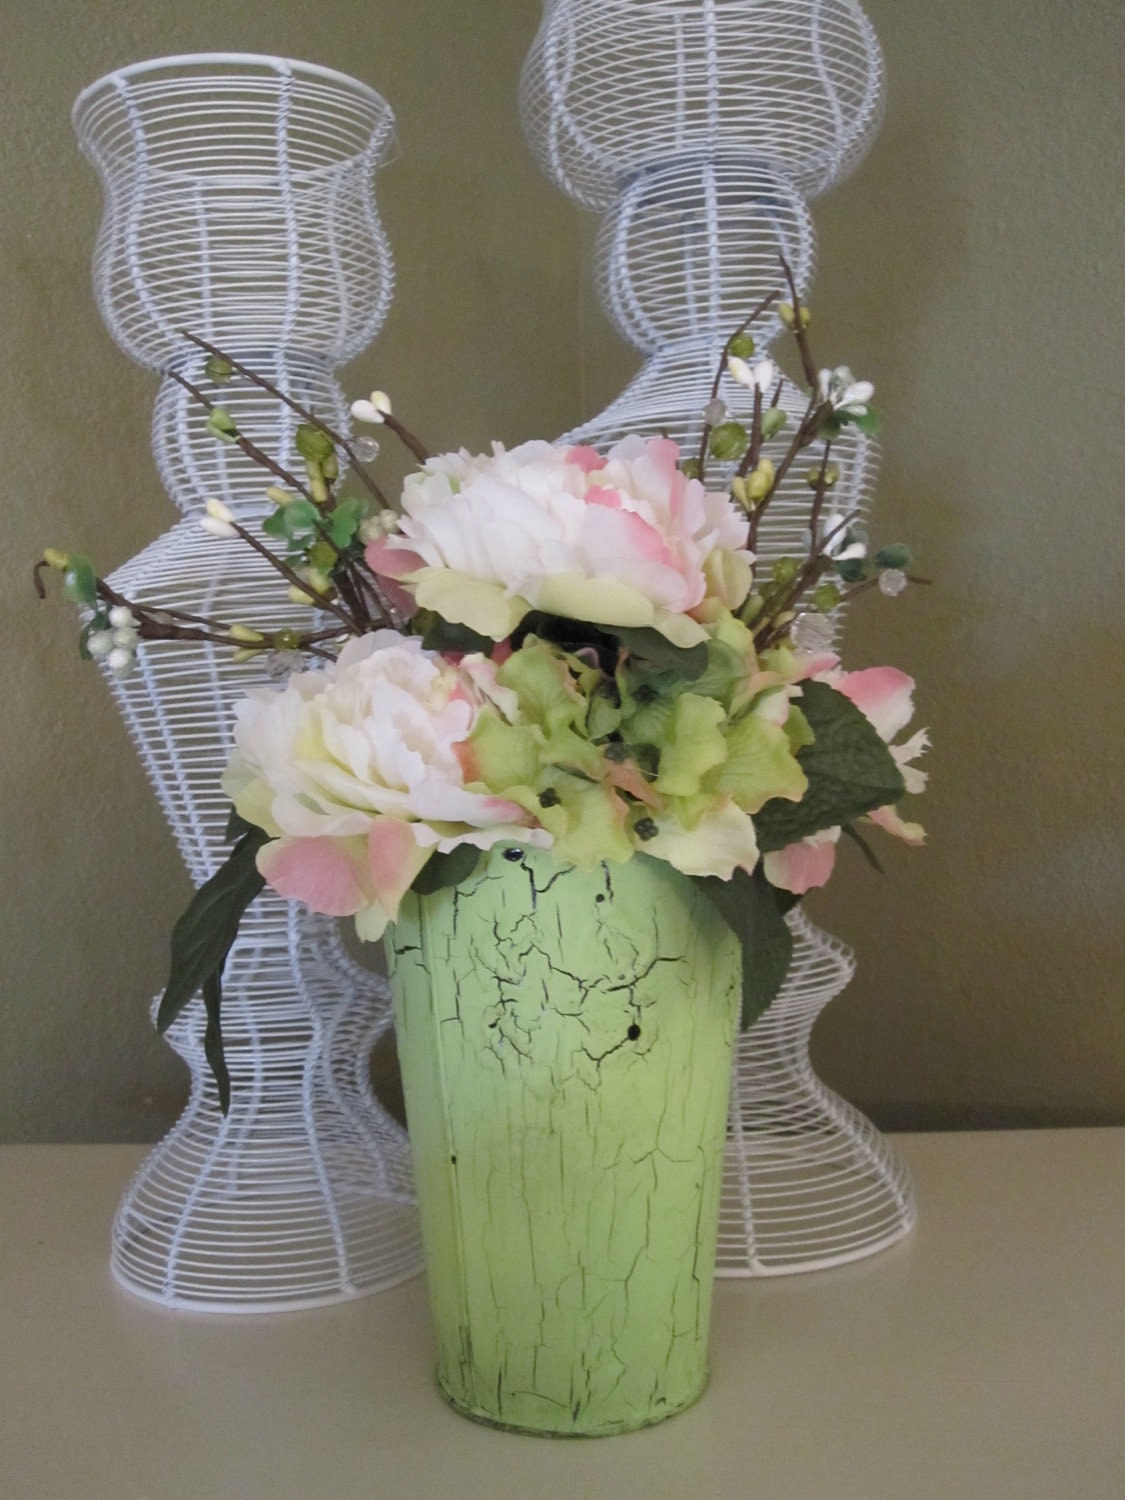 Cabbage Rose Shabby Chic Cottage Style Floral Arrangement Treasury Feature